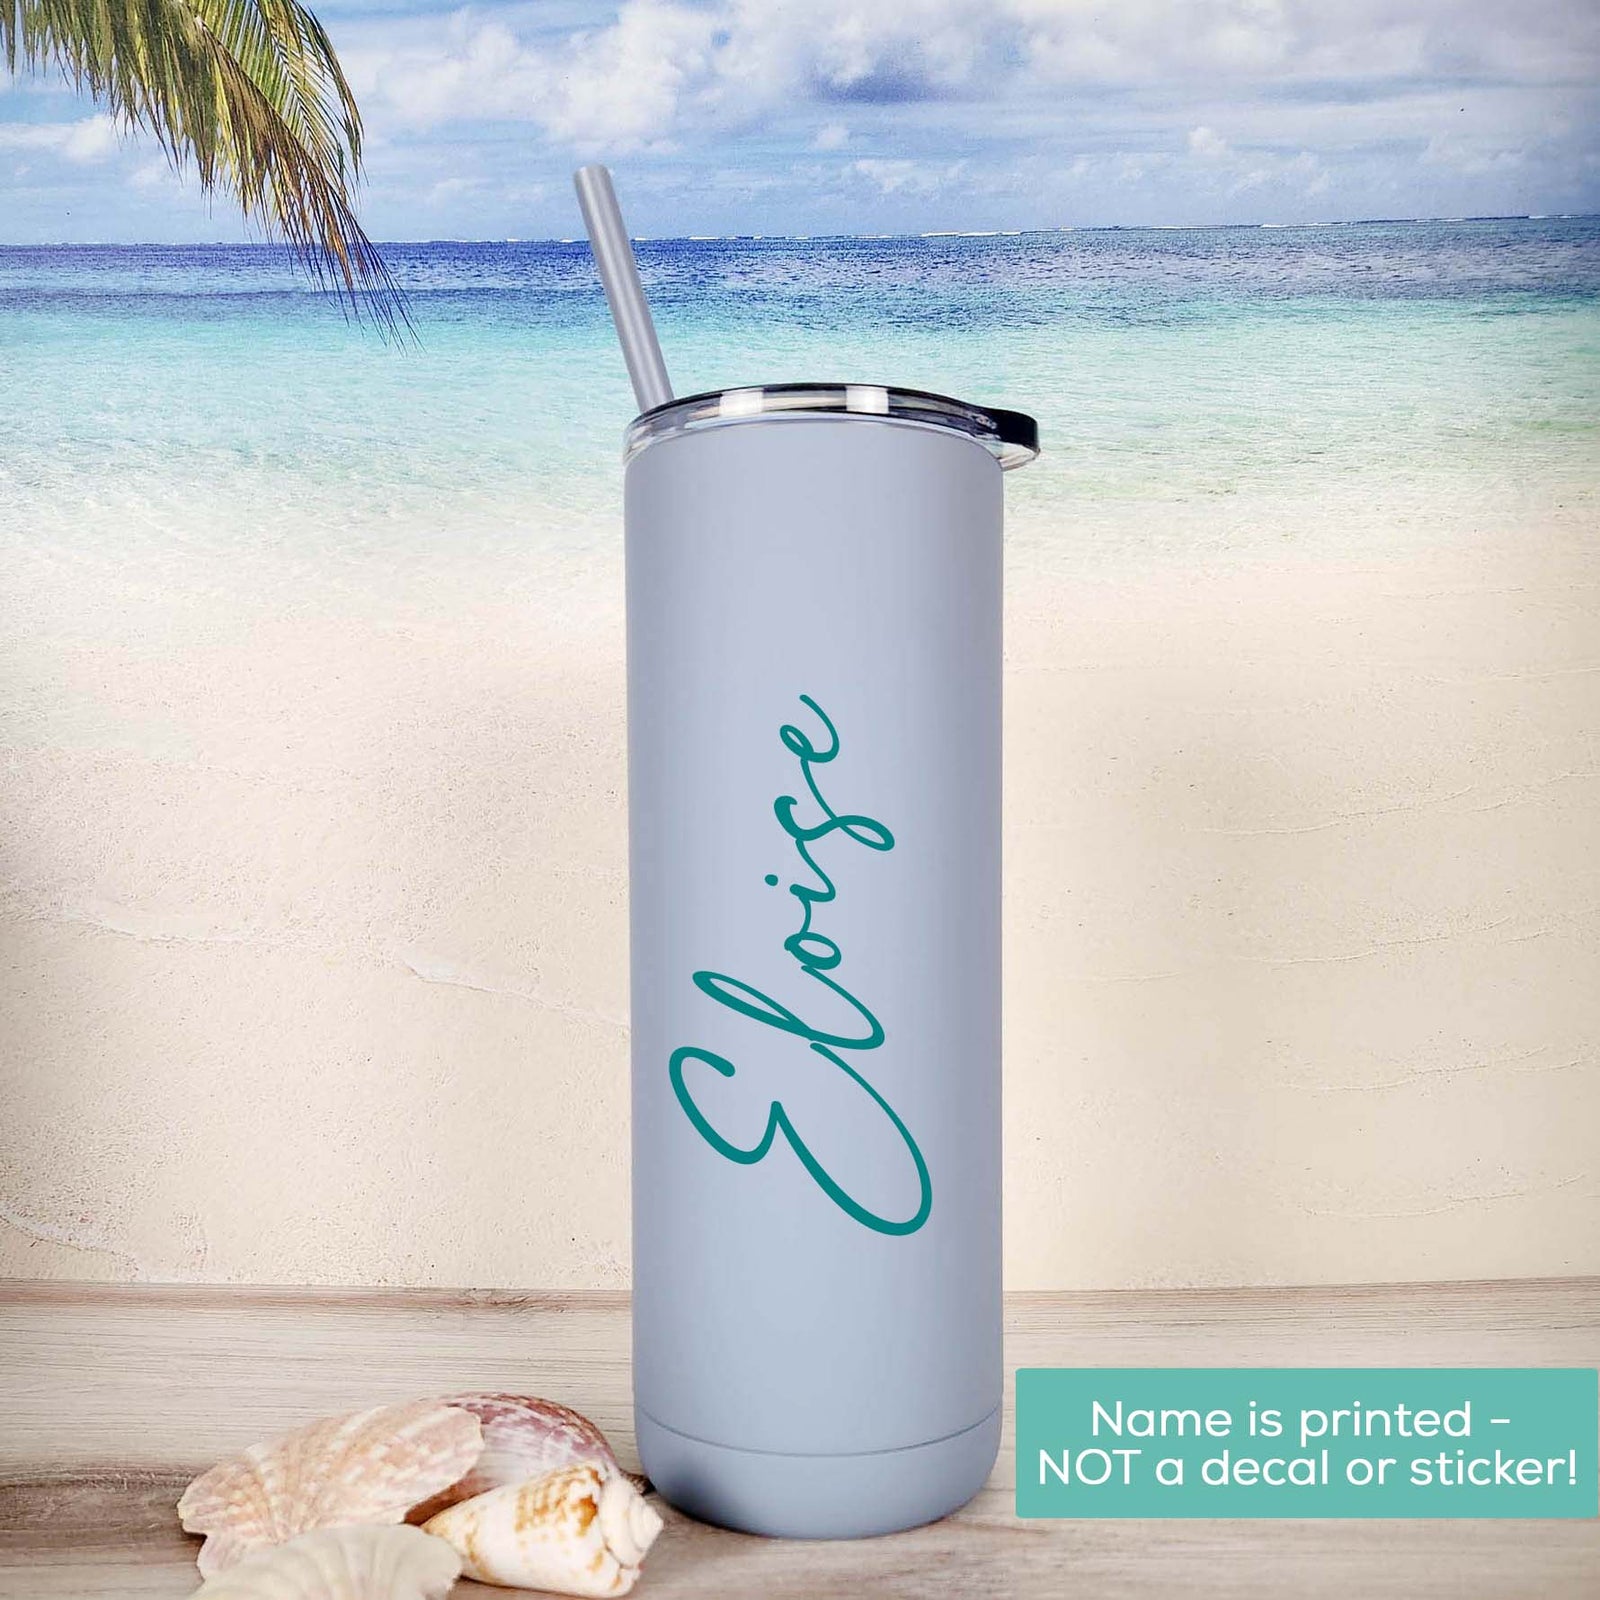 My Kids Have Paws - Engraved 20oz Skinny Tumbler – Sunny Box